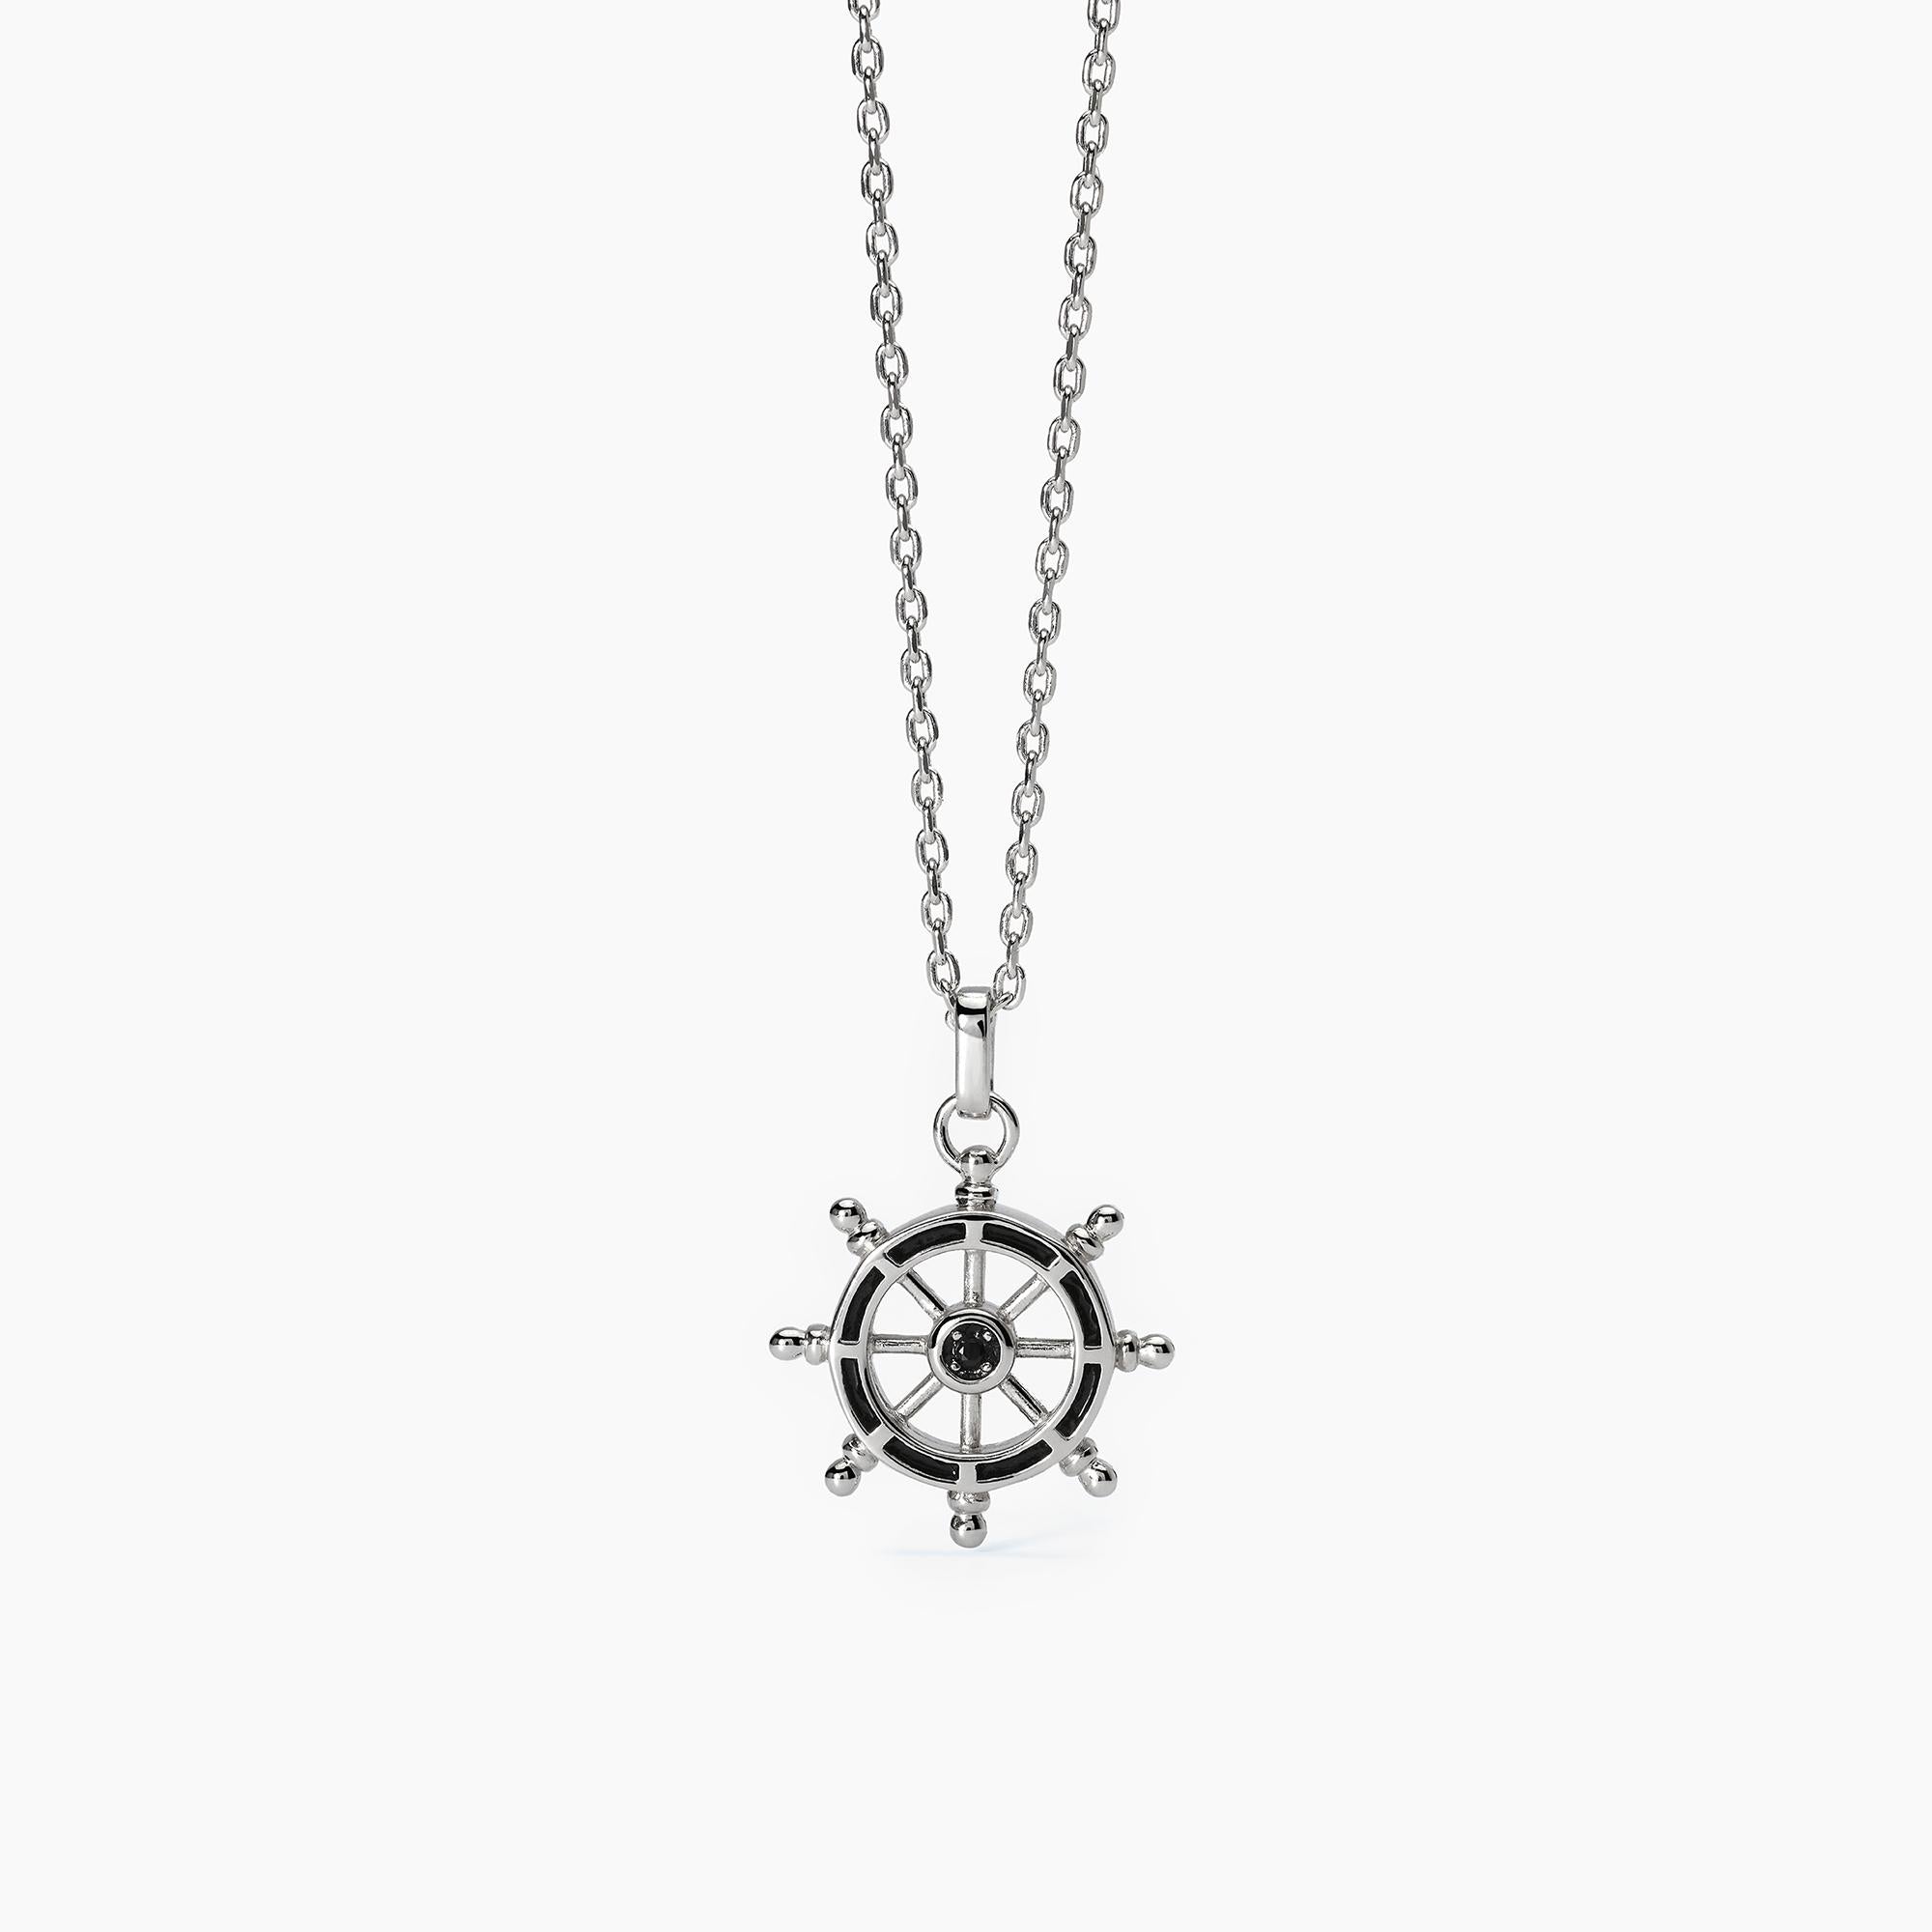 Mabina Man - Silver necklace with SEA MASTER rudder pendant - 553560